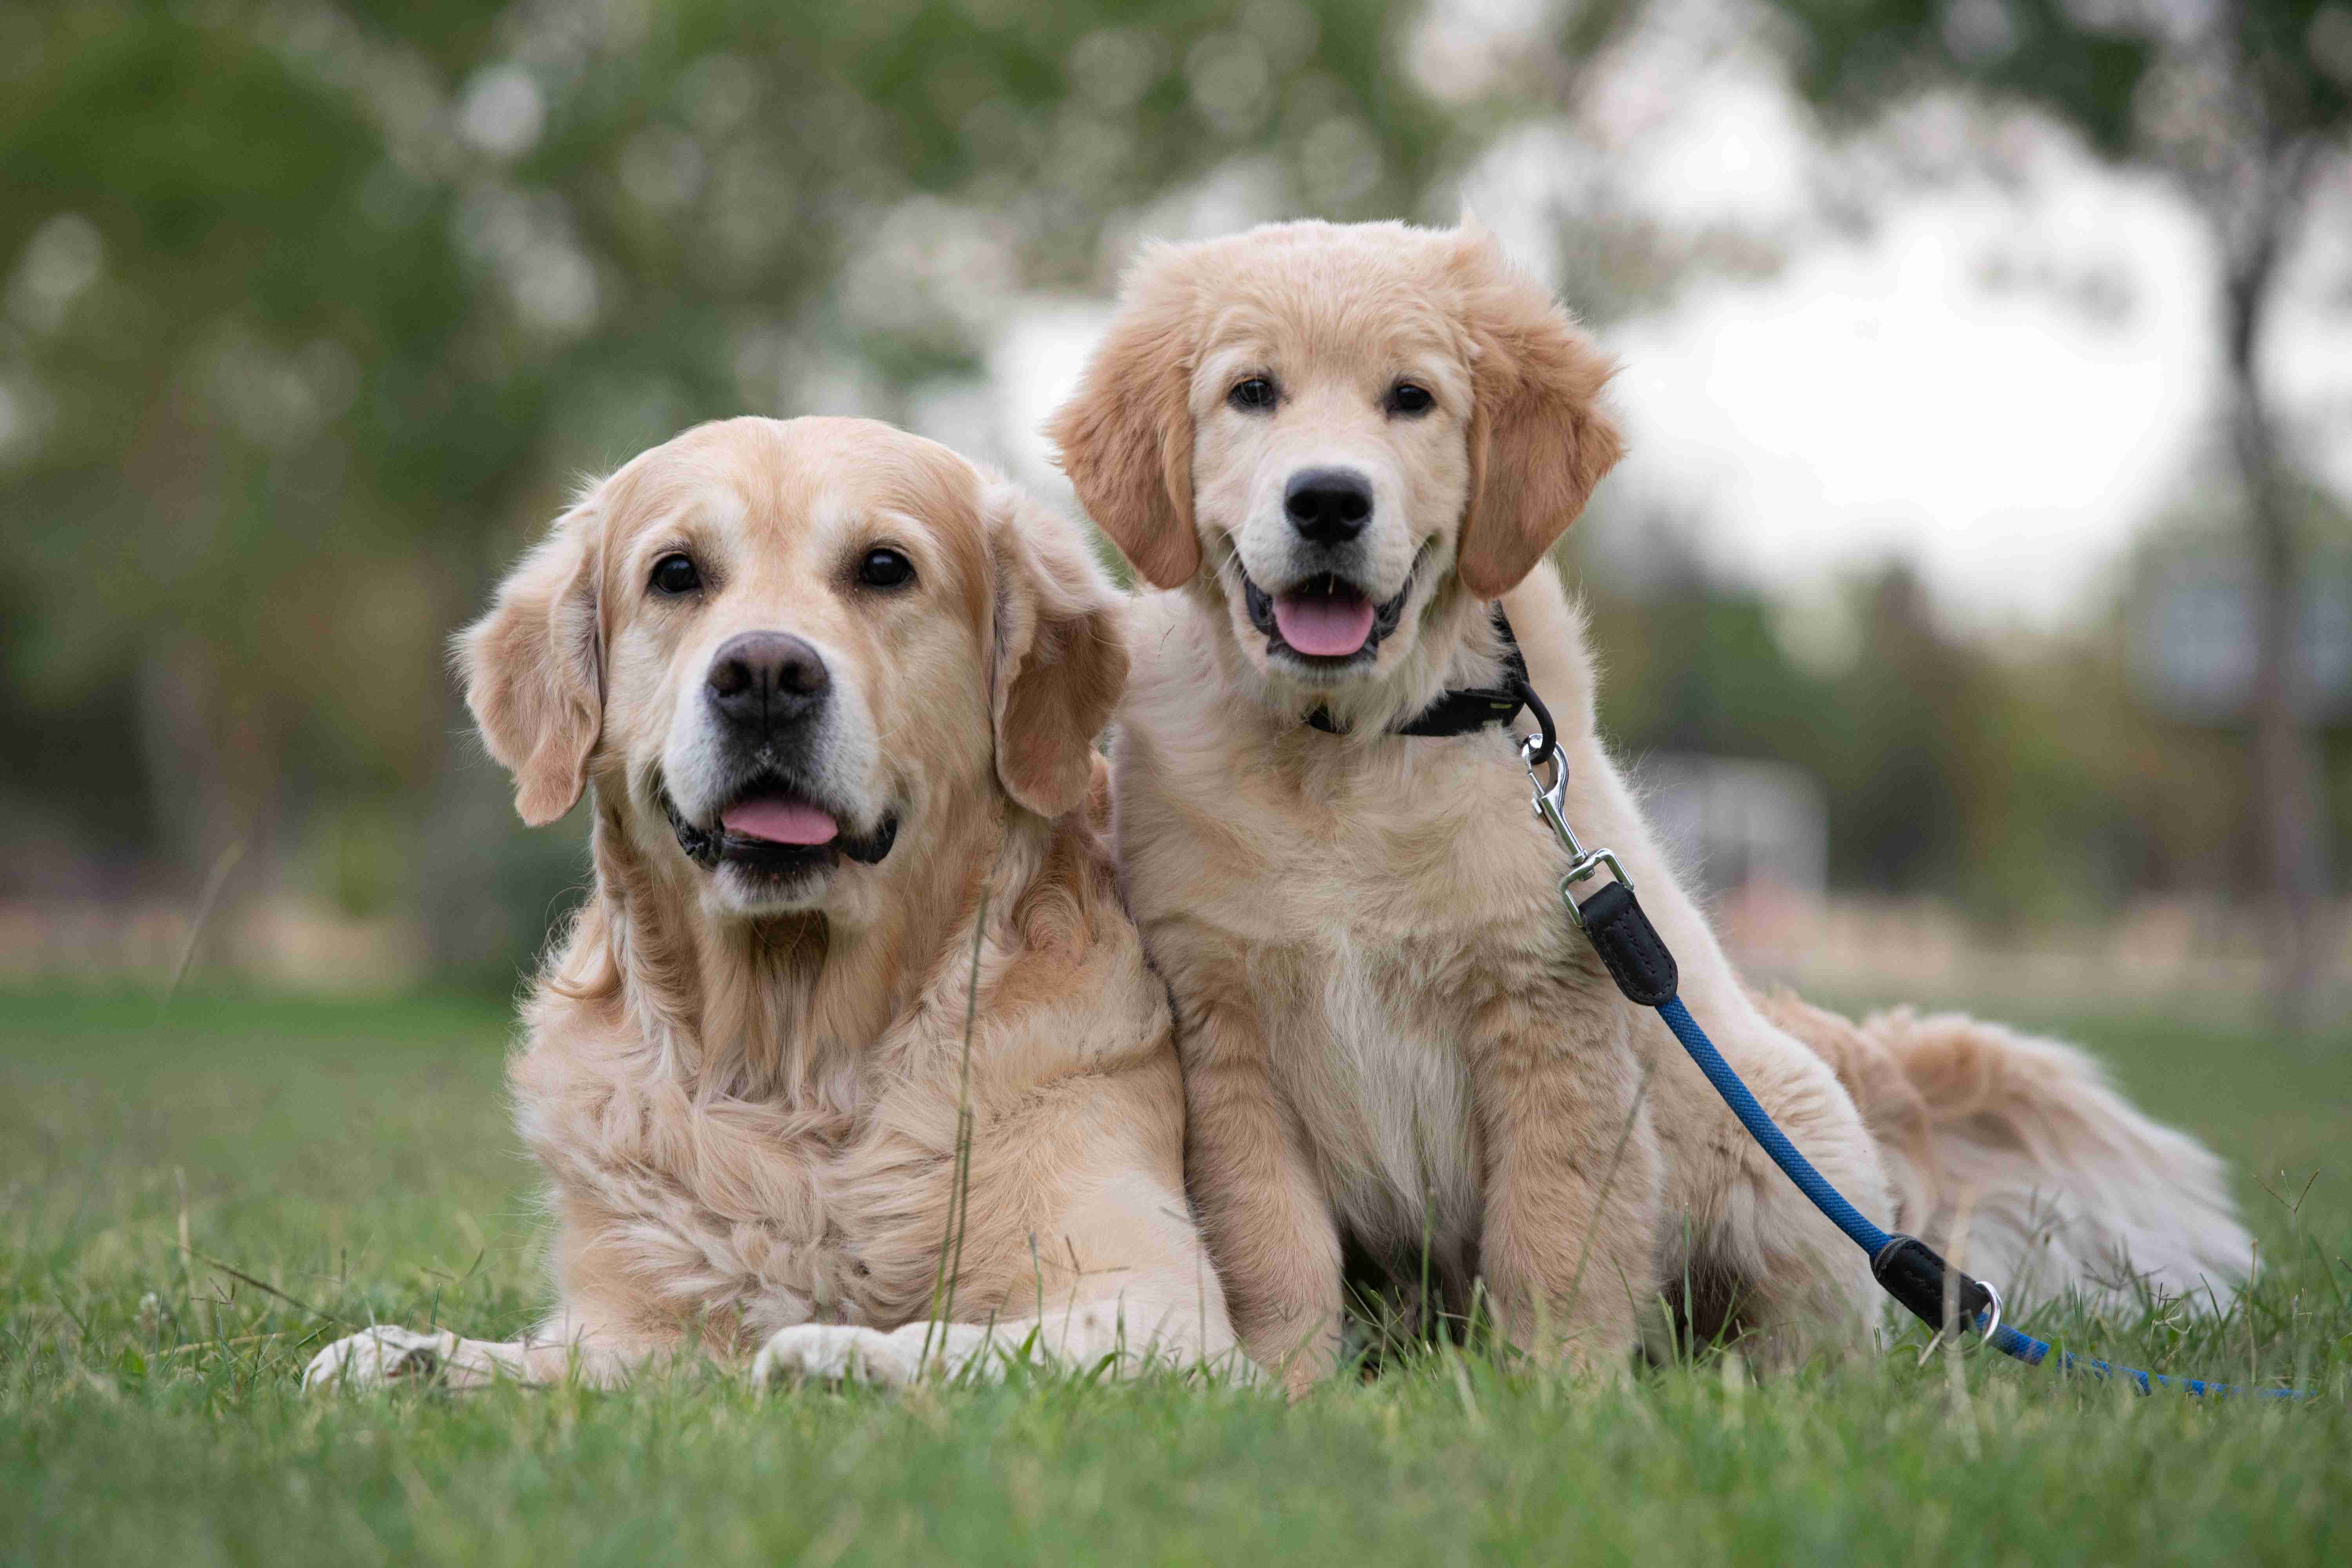 Grain-Free Diets and Golden Retrievers: Impacts on Health You Need to Know